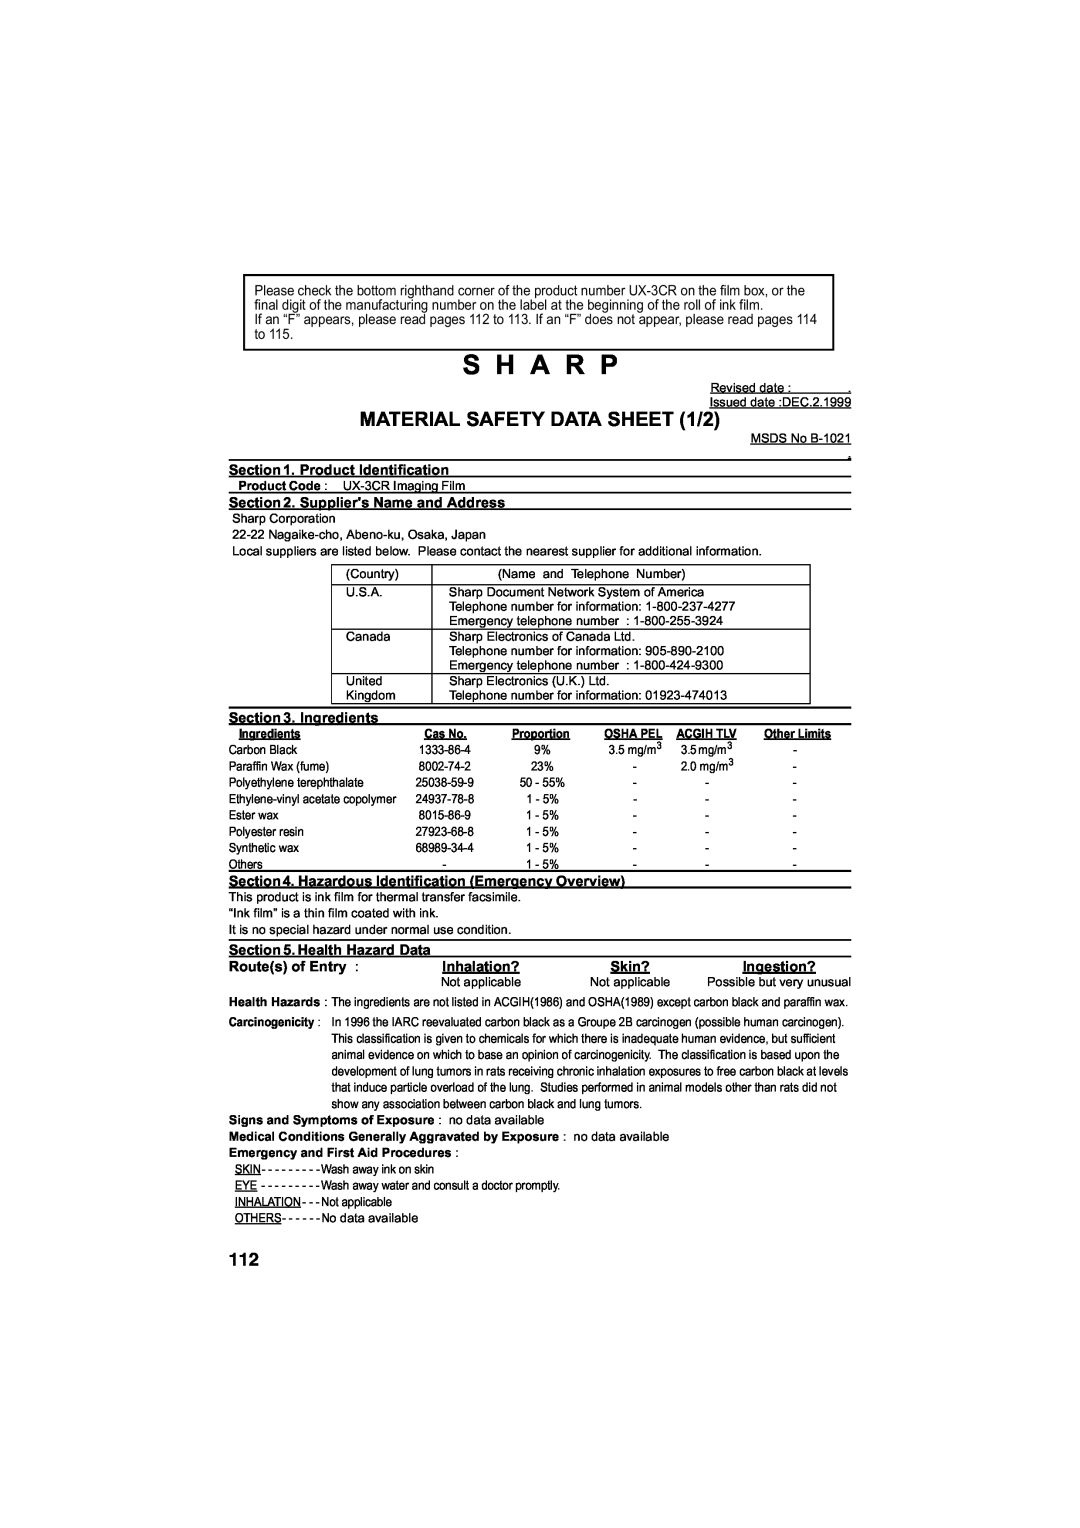 Sharp UX-340LM S H A R P, MATERIAL SAFETY DATA SHEET 1/2, Product Identification, Suppliers Name and Address, Ingredients 